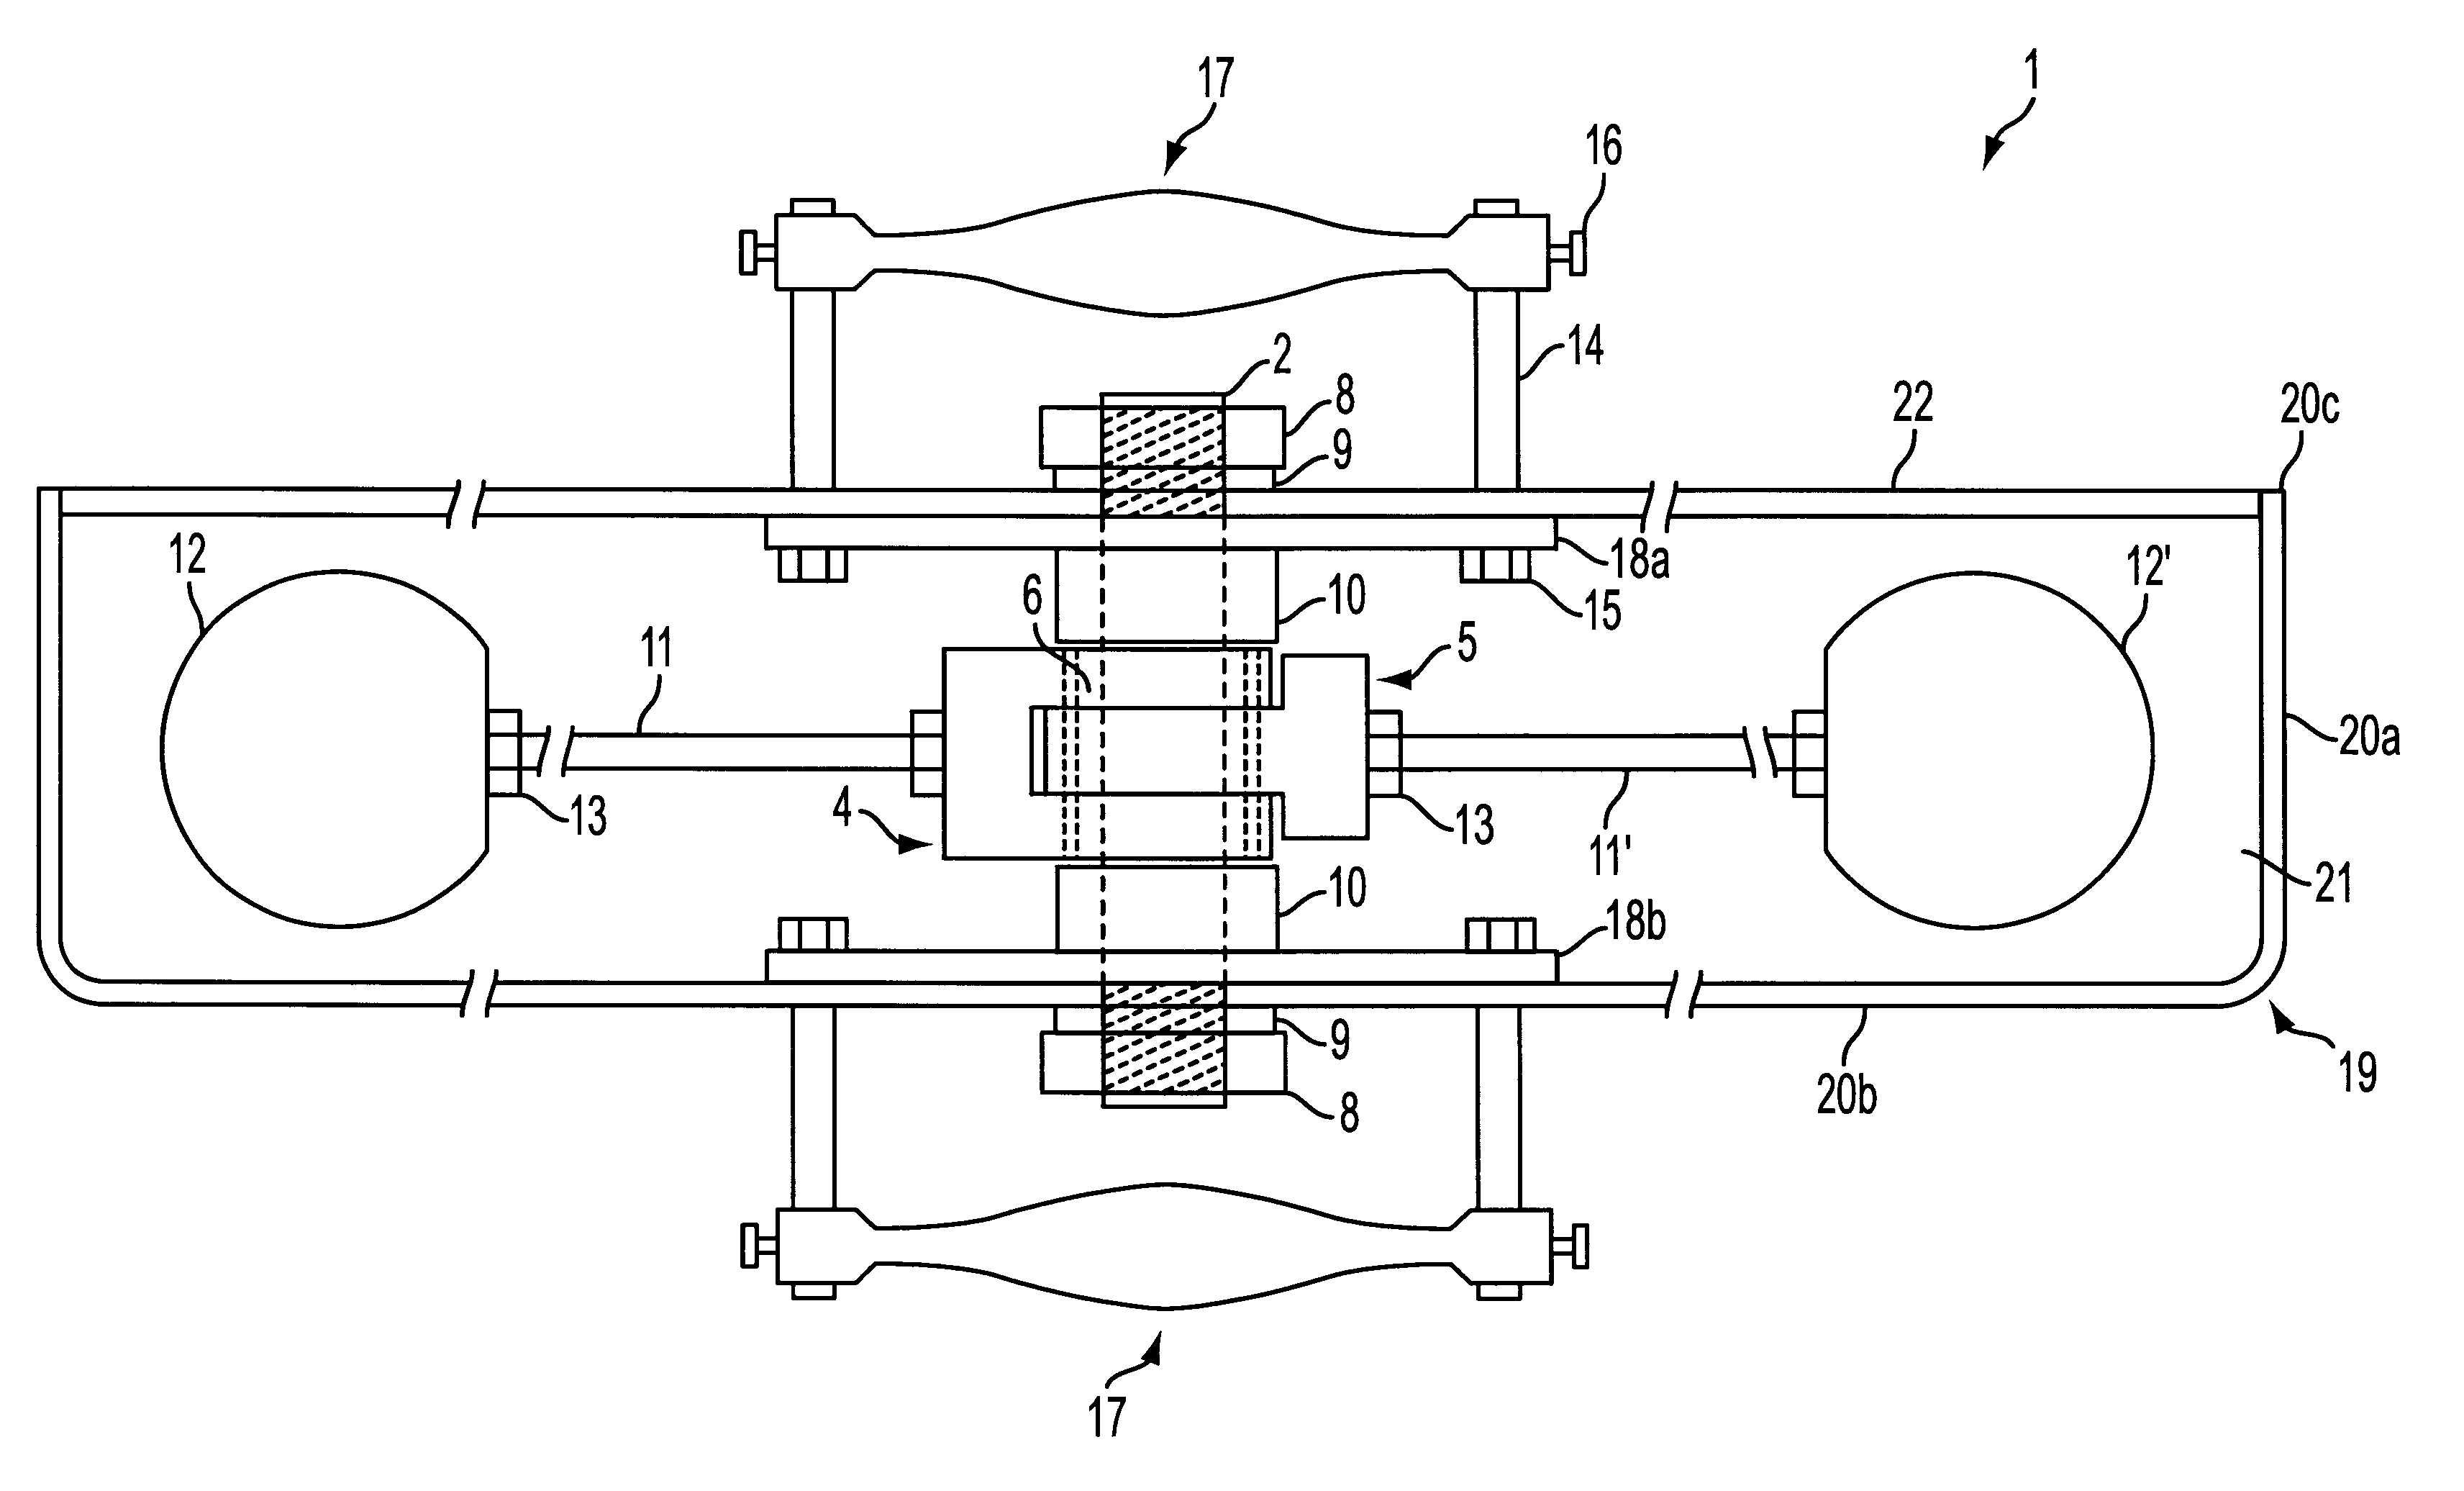 Inertial exerciser device, method of assembly, and method of exercising therewith